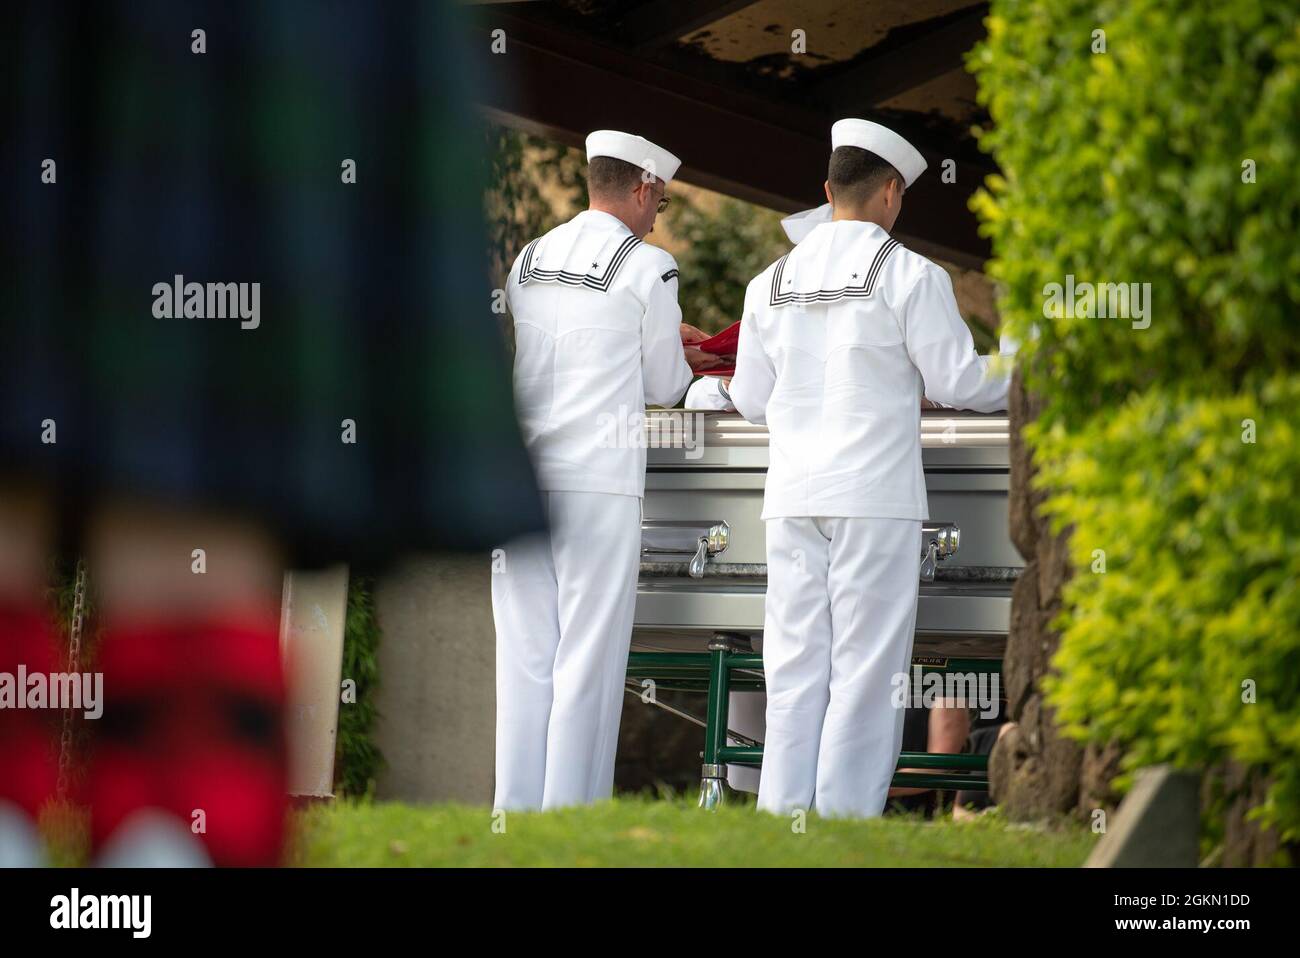 Sailors assigned to Navy Region Hawaii and the Defense POW/MIA Accounting Agency (DPAA) conduct a funeral for U.S. Navy Gunner’s Mate 3rd Class Shelby Treadway, 25, of Manchester, Kentucky, at the National Memorial Cemetery of the Pacific, Honolulu, Hawaii, June 2, 2021. Treadway was assigned to the USS Oklahoma, which sustained fire from Japanese aircraft and multiple torpedo hits causing the ship to capsize and resulted in the deaths of more than 400 crew members on Dec. 7, 1941, at Ford Island, Pearl Harbor. Treadway was recently identified through DNA analysis by the DPAA forensic laborato Stock Photo